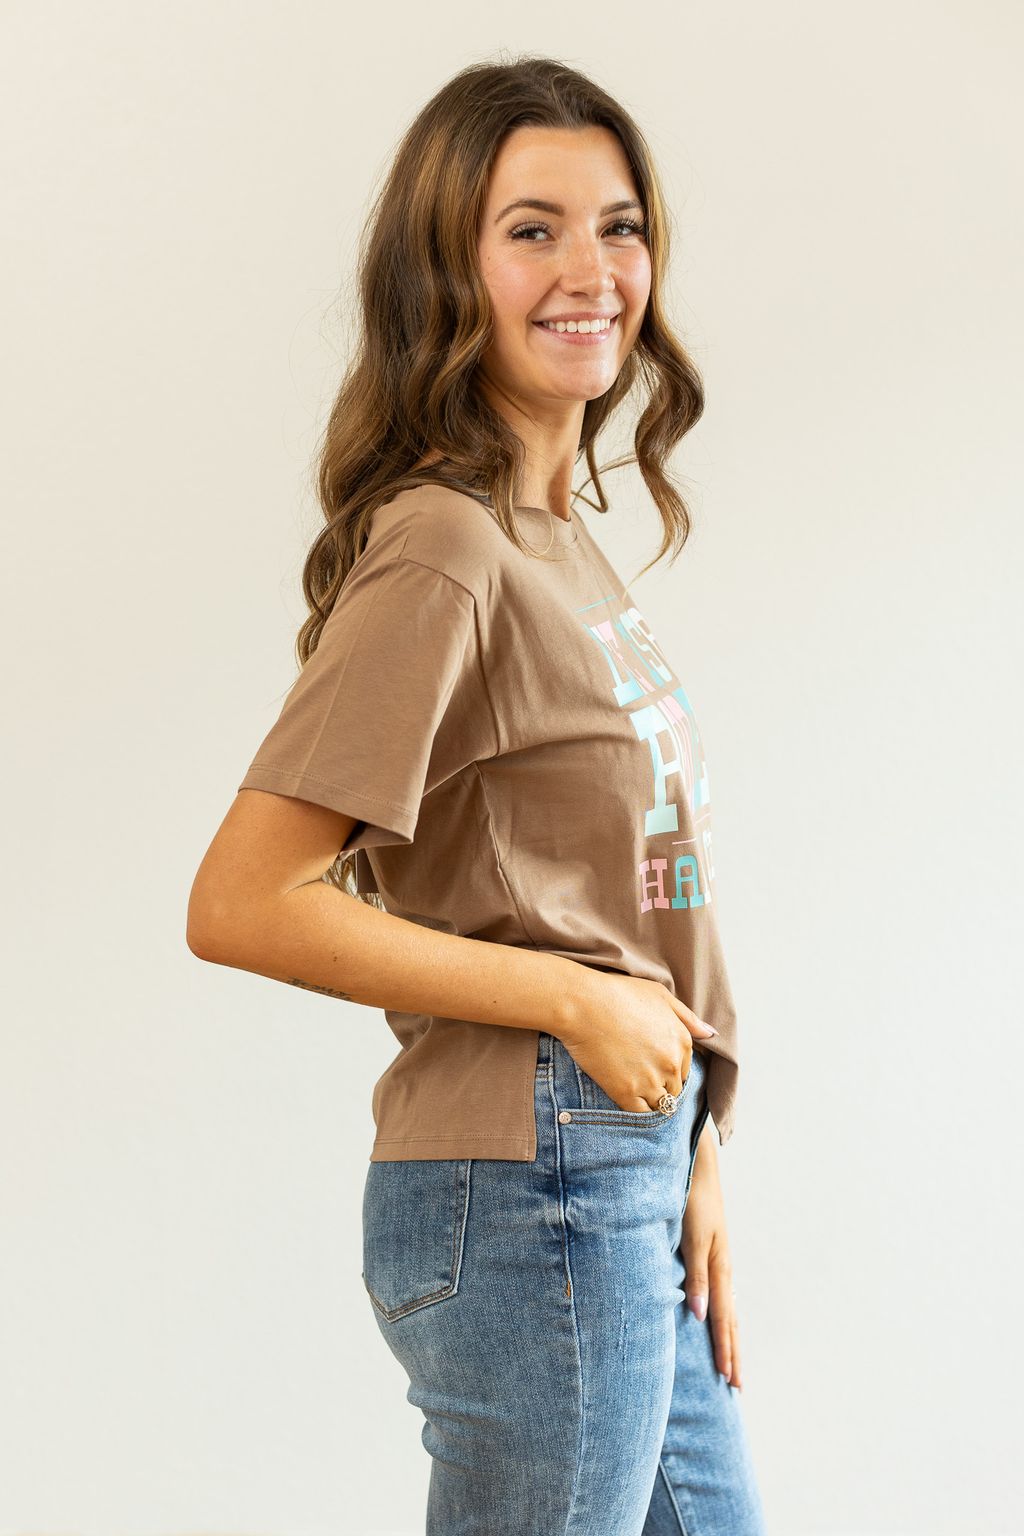 Life is a Rodeo Mom Crop, Tan